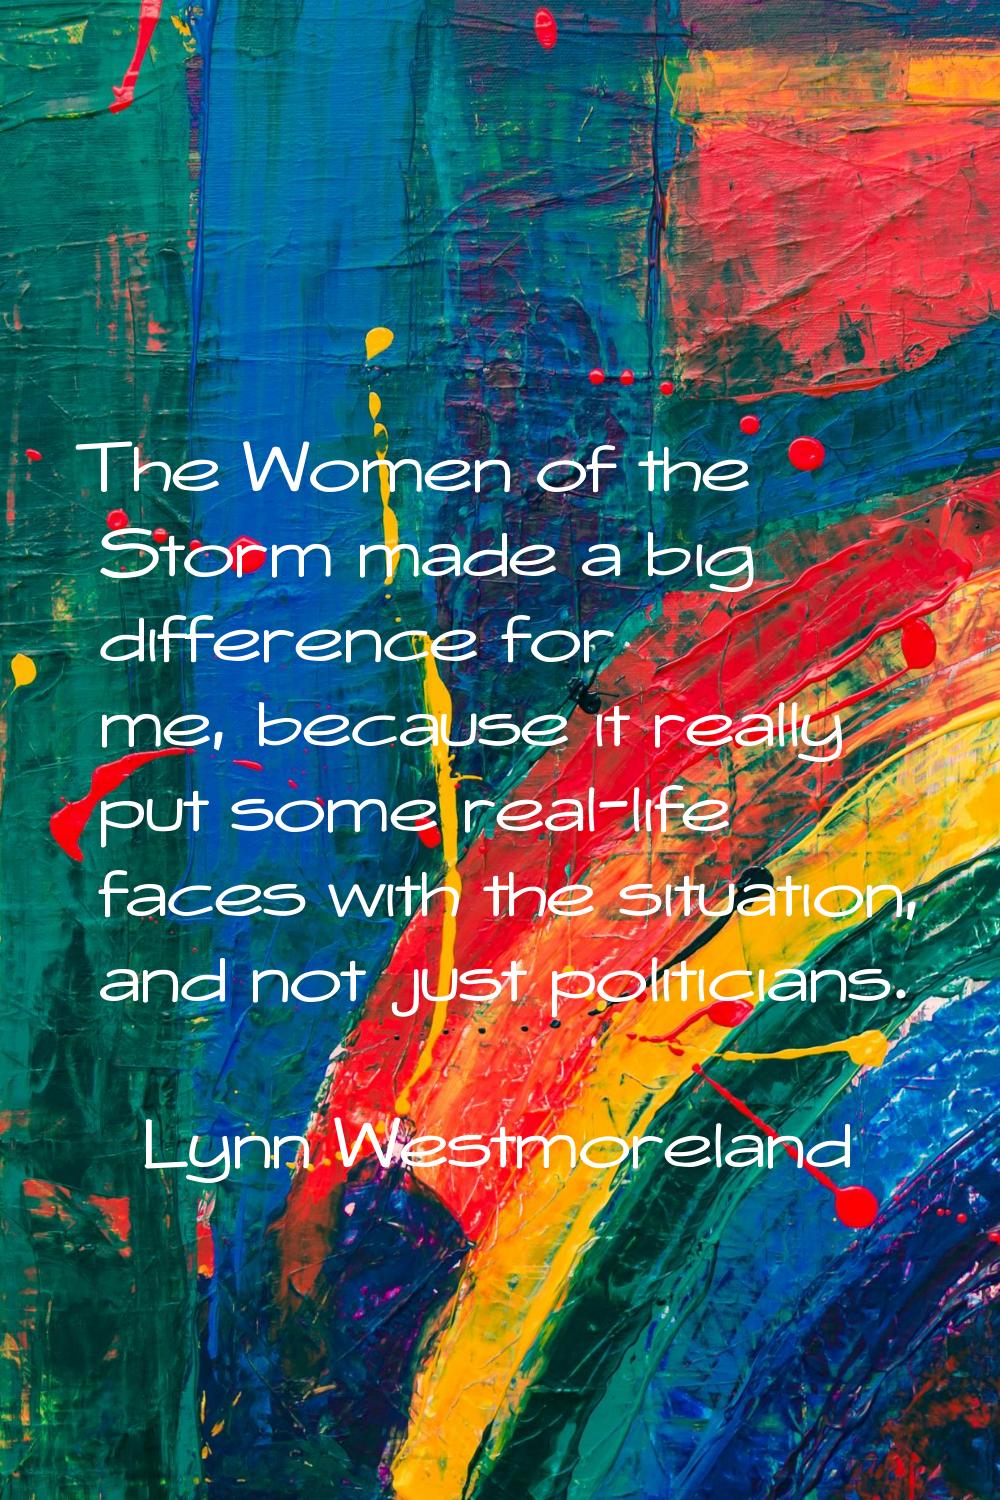 The Women of the Storm made a big difference for me, because it really put some real-life faces wit